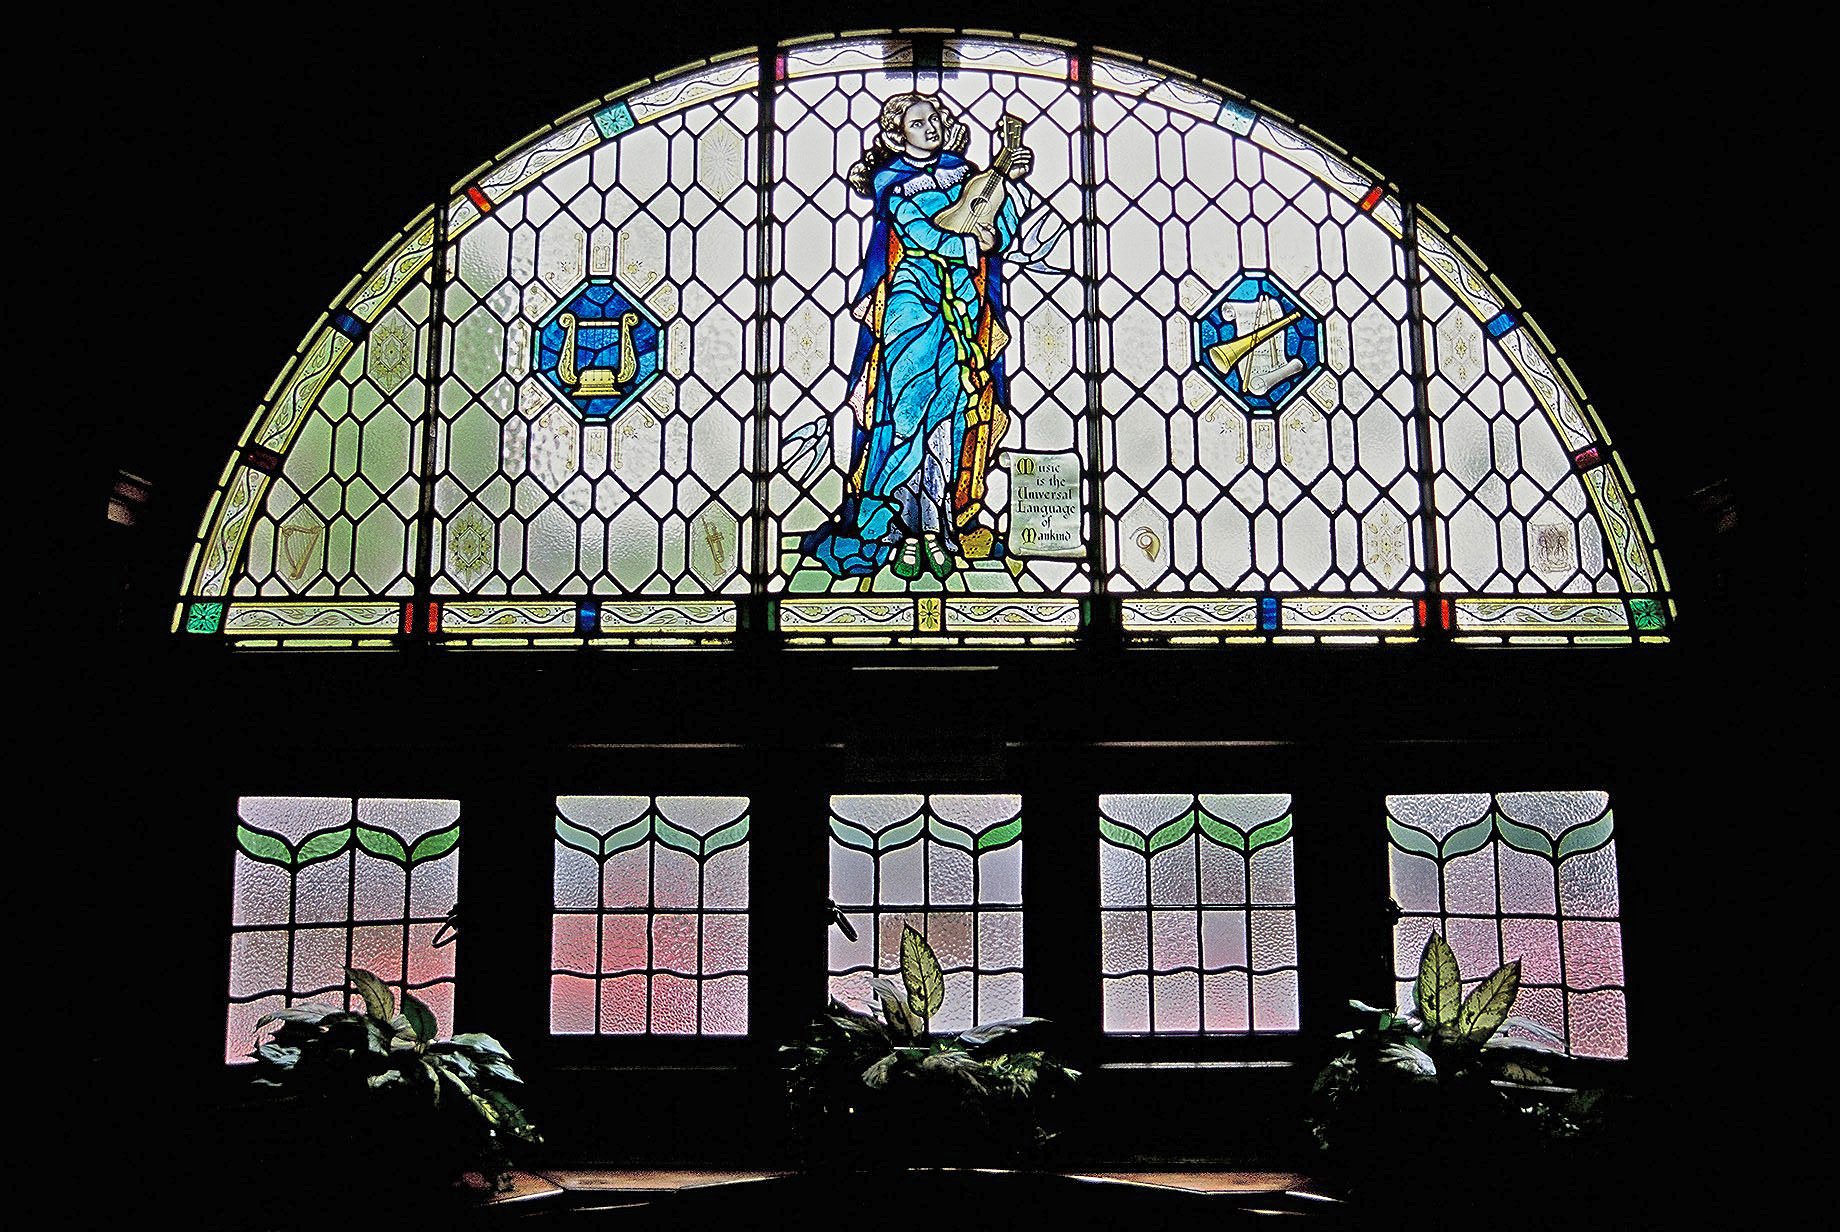 A stained glass window from a public house depicting Saint Cecilia playing a lute-like instrument.